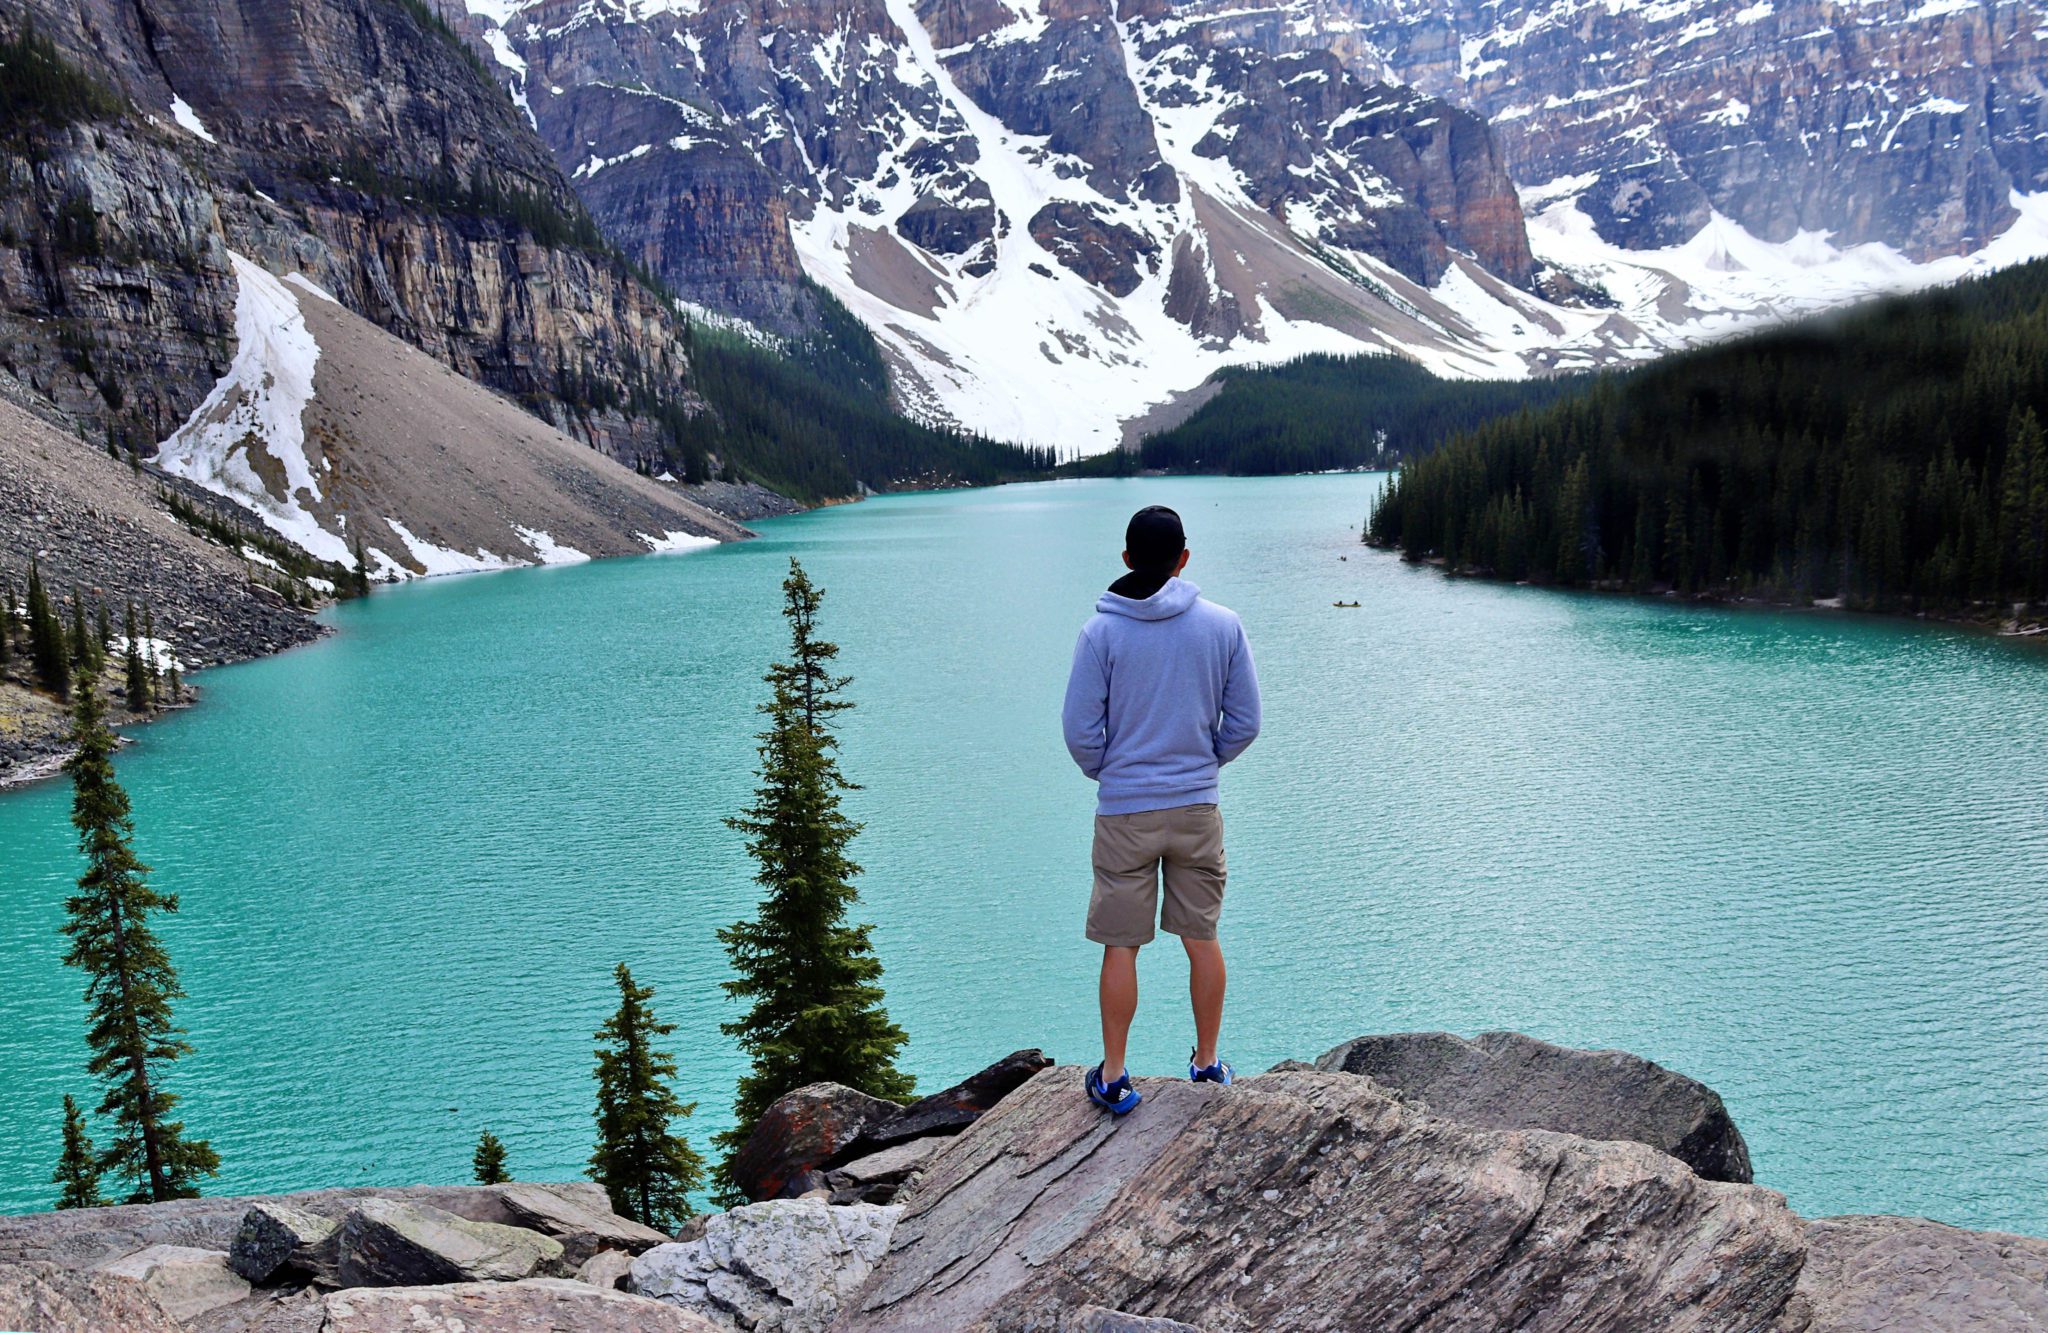 Tips for taking photos at Moraine Lake | Banff Photography Guide: 15 Amazing Spots to take Photos in Banff | Simply Wander #banff #canada #simplywander #morainelake